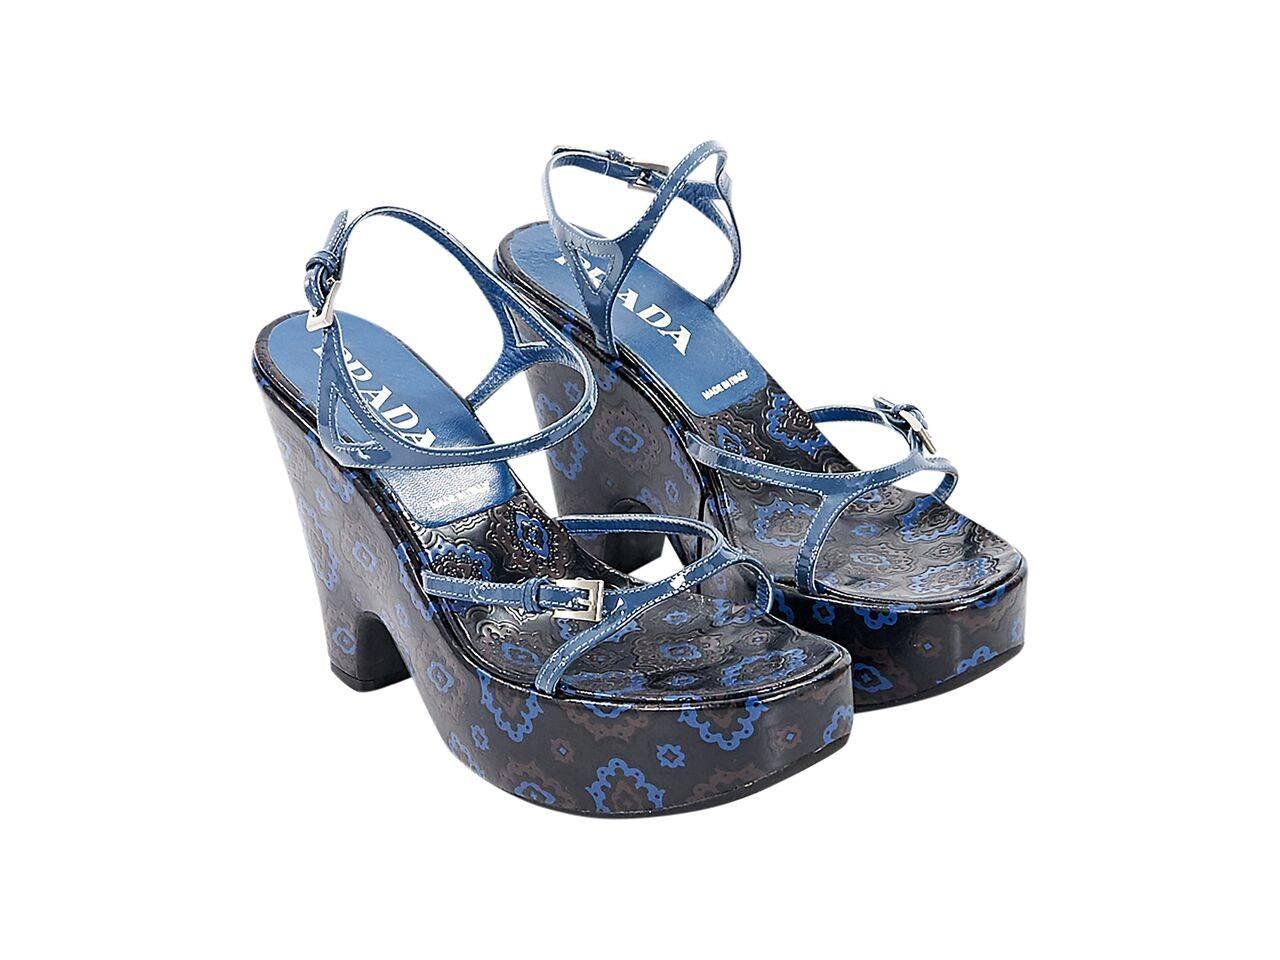 Product details:  Blue and brown patterned leather wedge sandals by Prada.  Adjustable slingback strap.  Open toe.  Silvetone hardware. 
Condition: Pre-owned. Very good.
Est. Retail $ 498.00